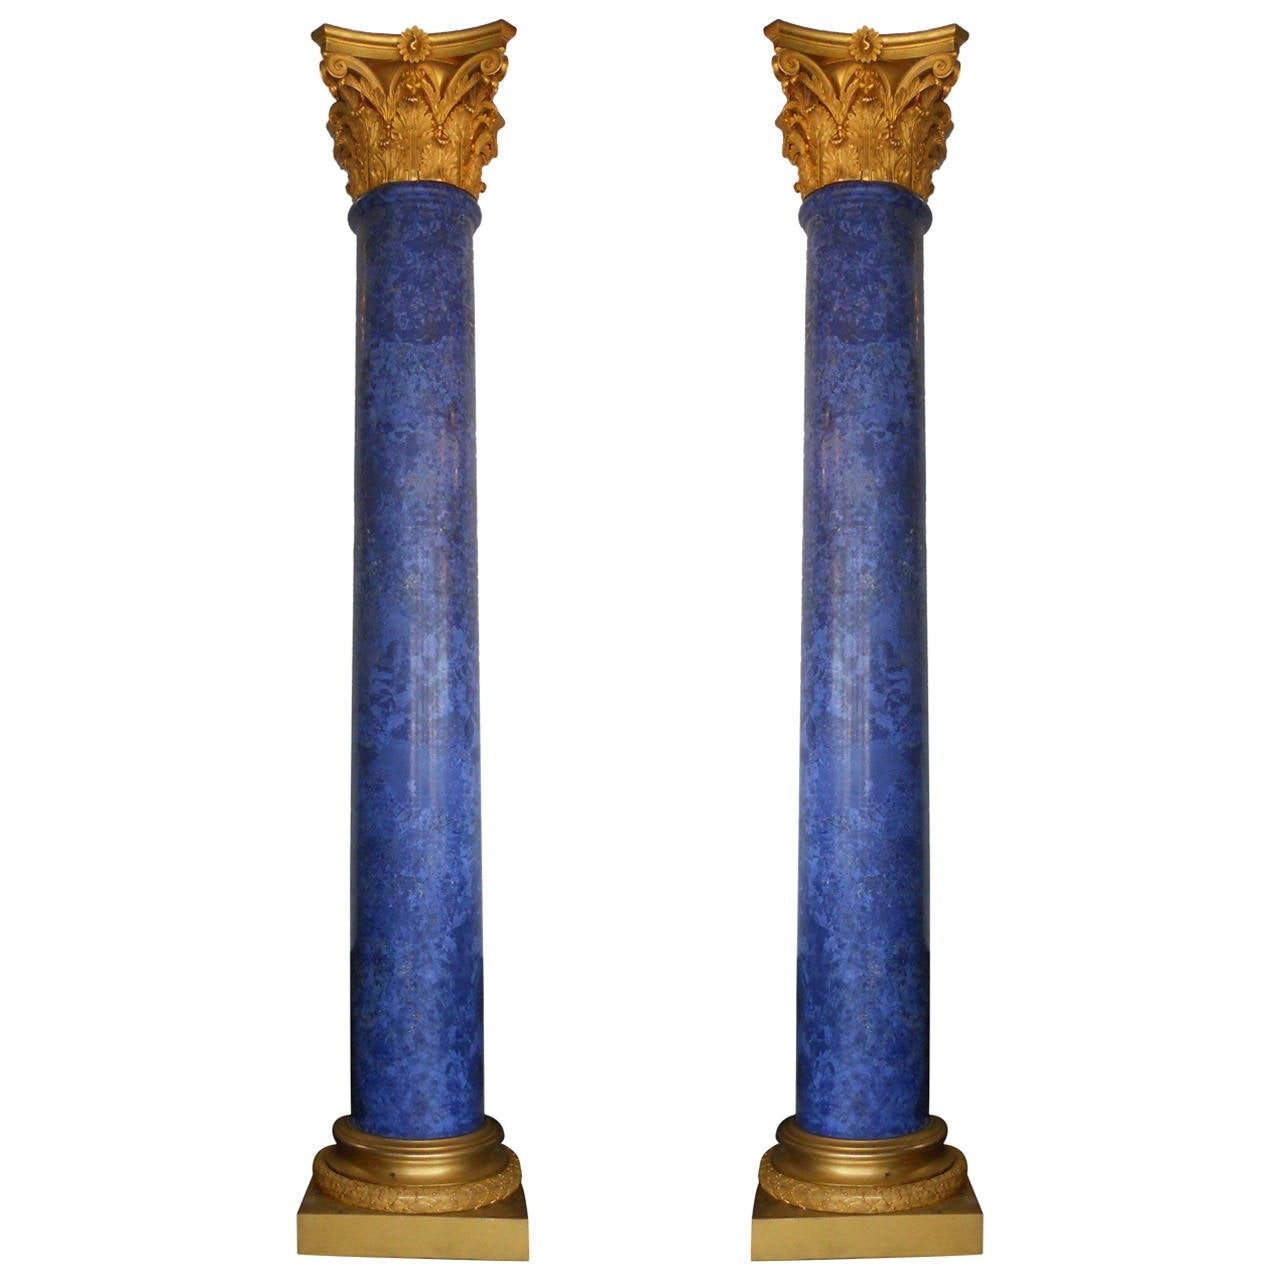 Grand pair of lapis lazuli columns from a unique collection